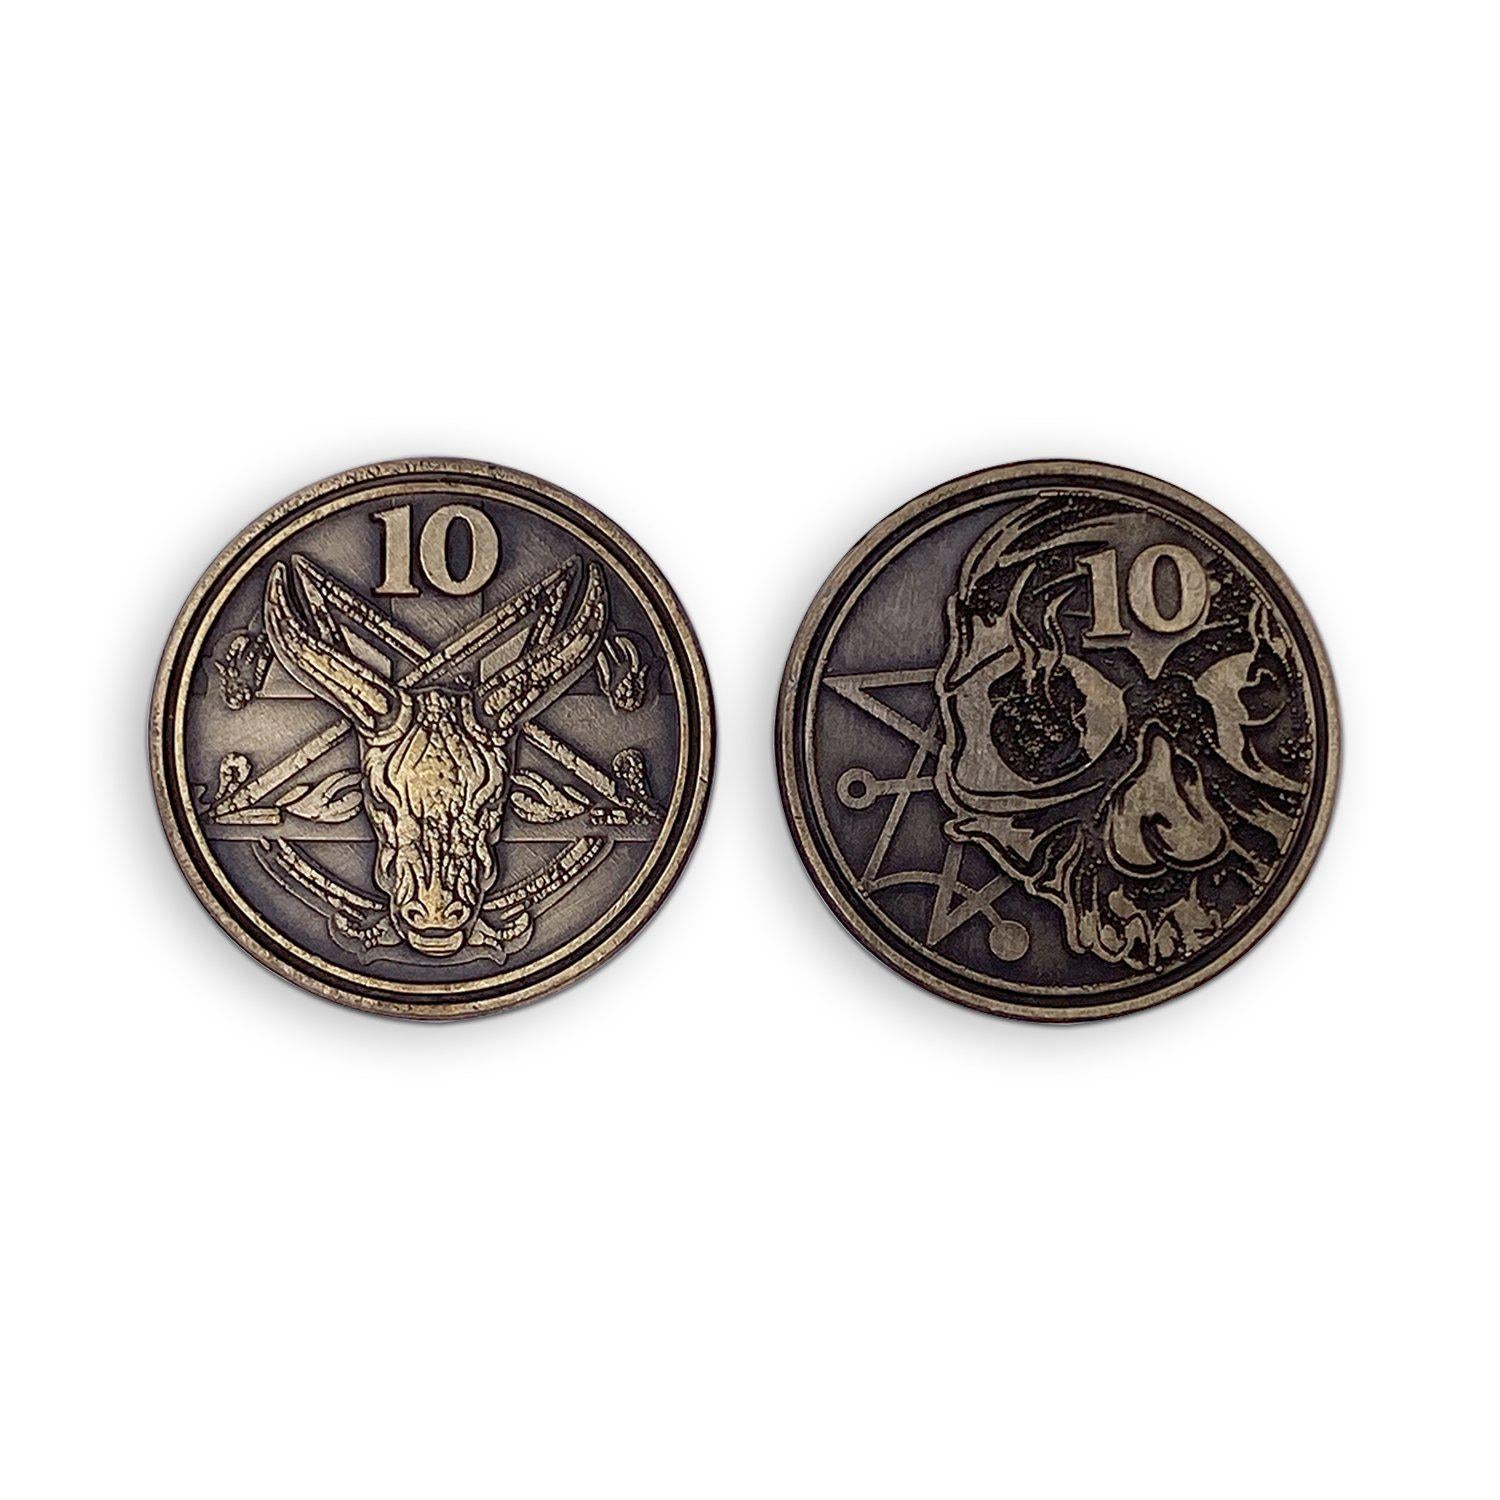 Adventure Coins - Necromancy Metal Coins Variety Pack Set of 10